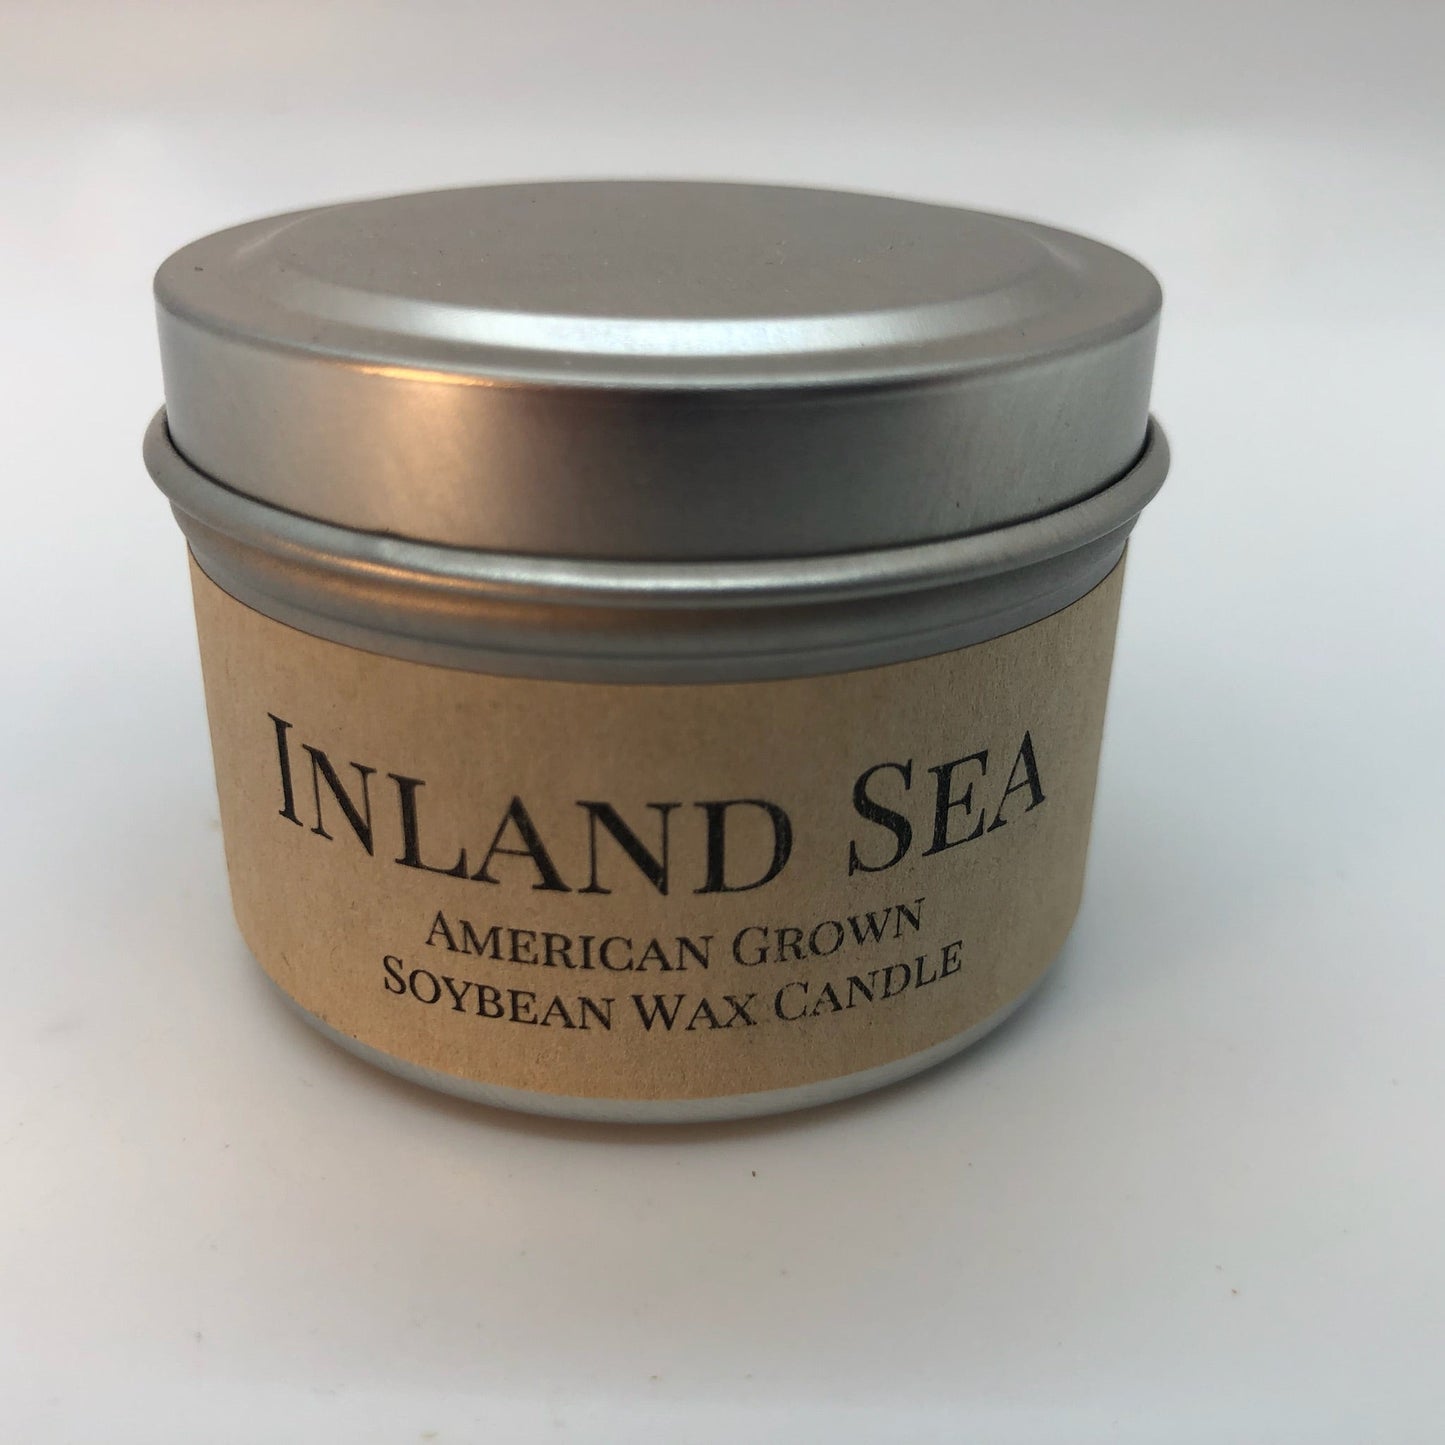 Inland Sea Soy Candle | 2 oz Travel Tin